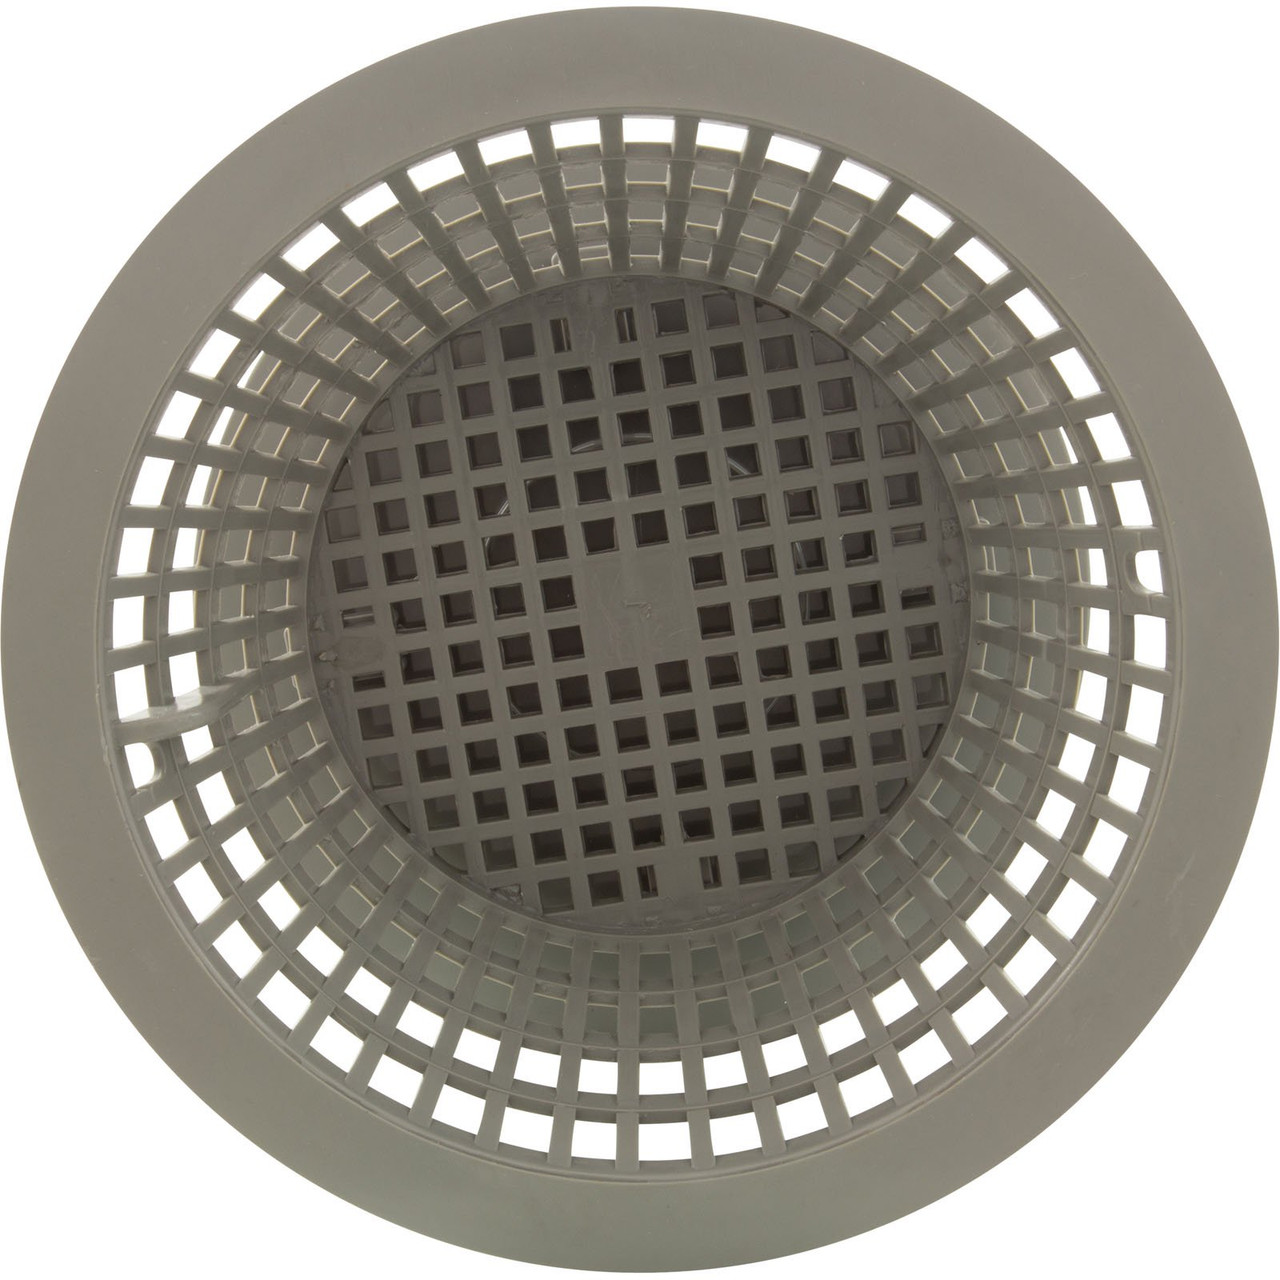 Top Mount, Filter, Basket, Gray, Custom Molded Products, CMP, 25351-909-200, 682470413667, 519-8017, 500-2691, 500-2687, 500-2680, 500-2691, Dyna-Flo, Waterway